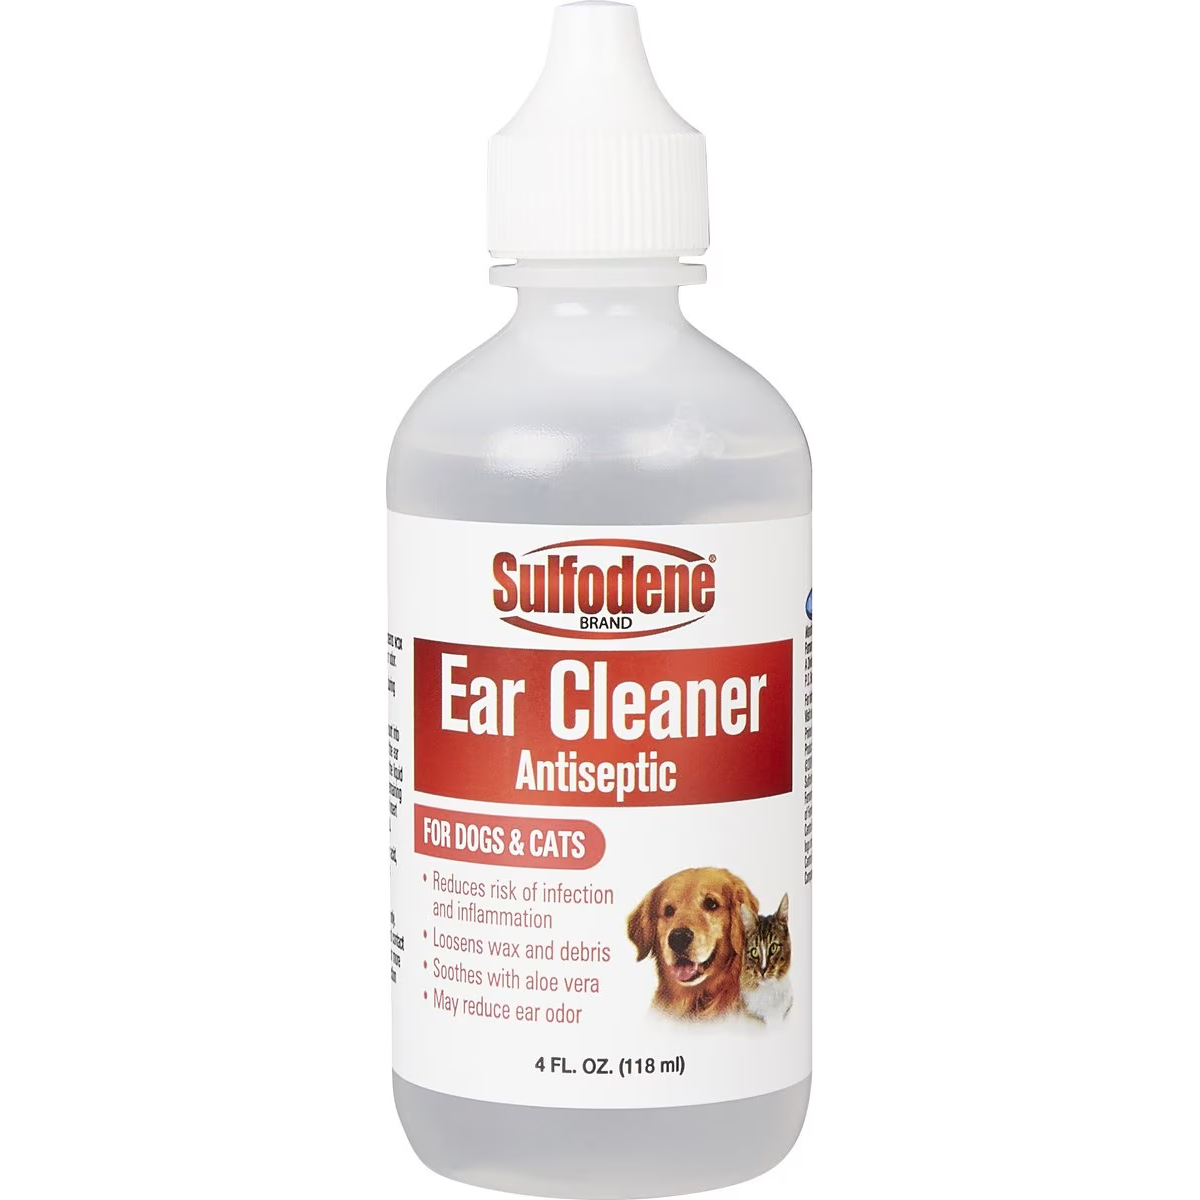 Sulfodene Ear Cleaner Antiseptic for Dogs & Cats